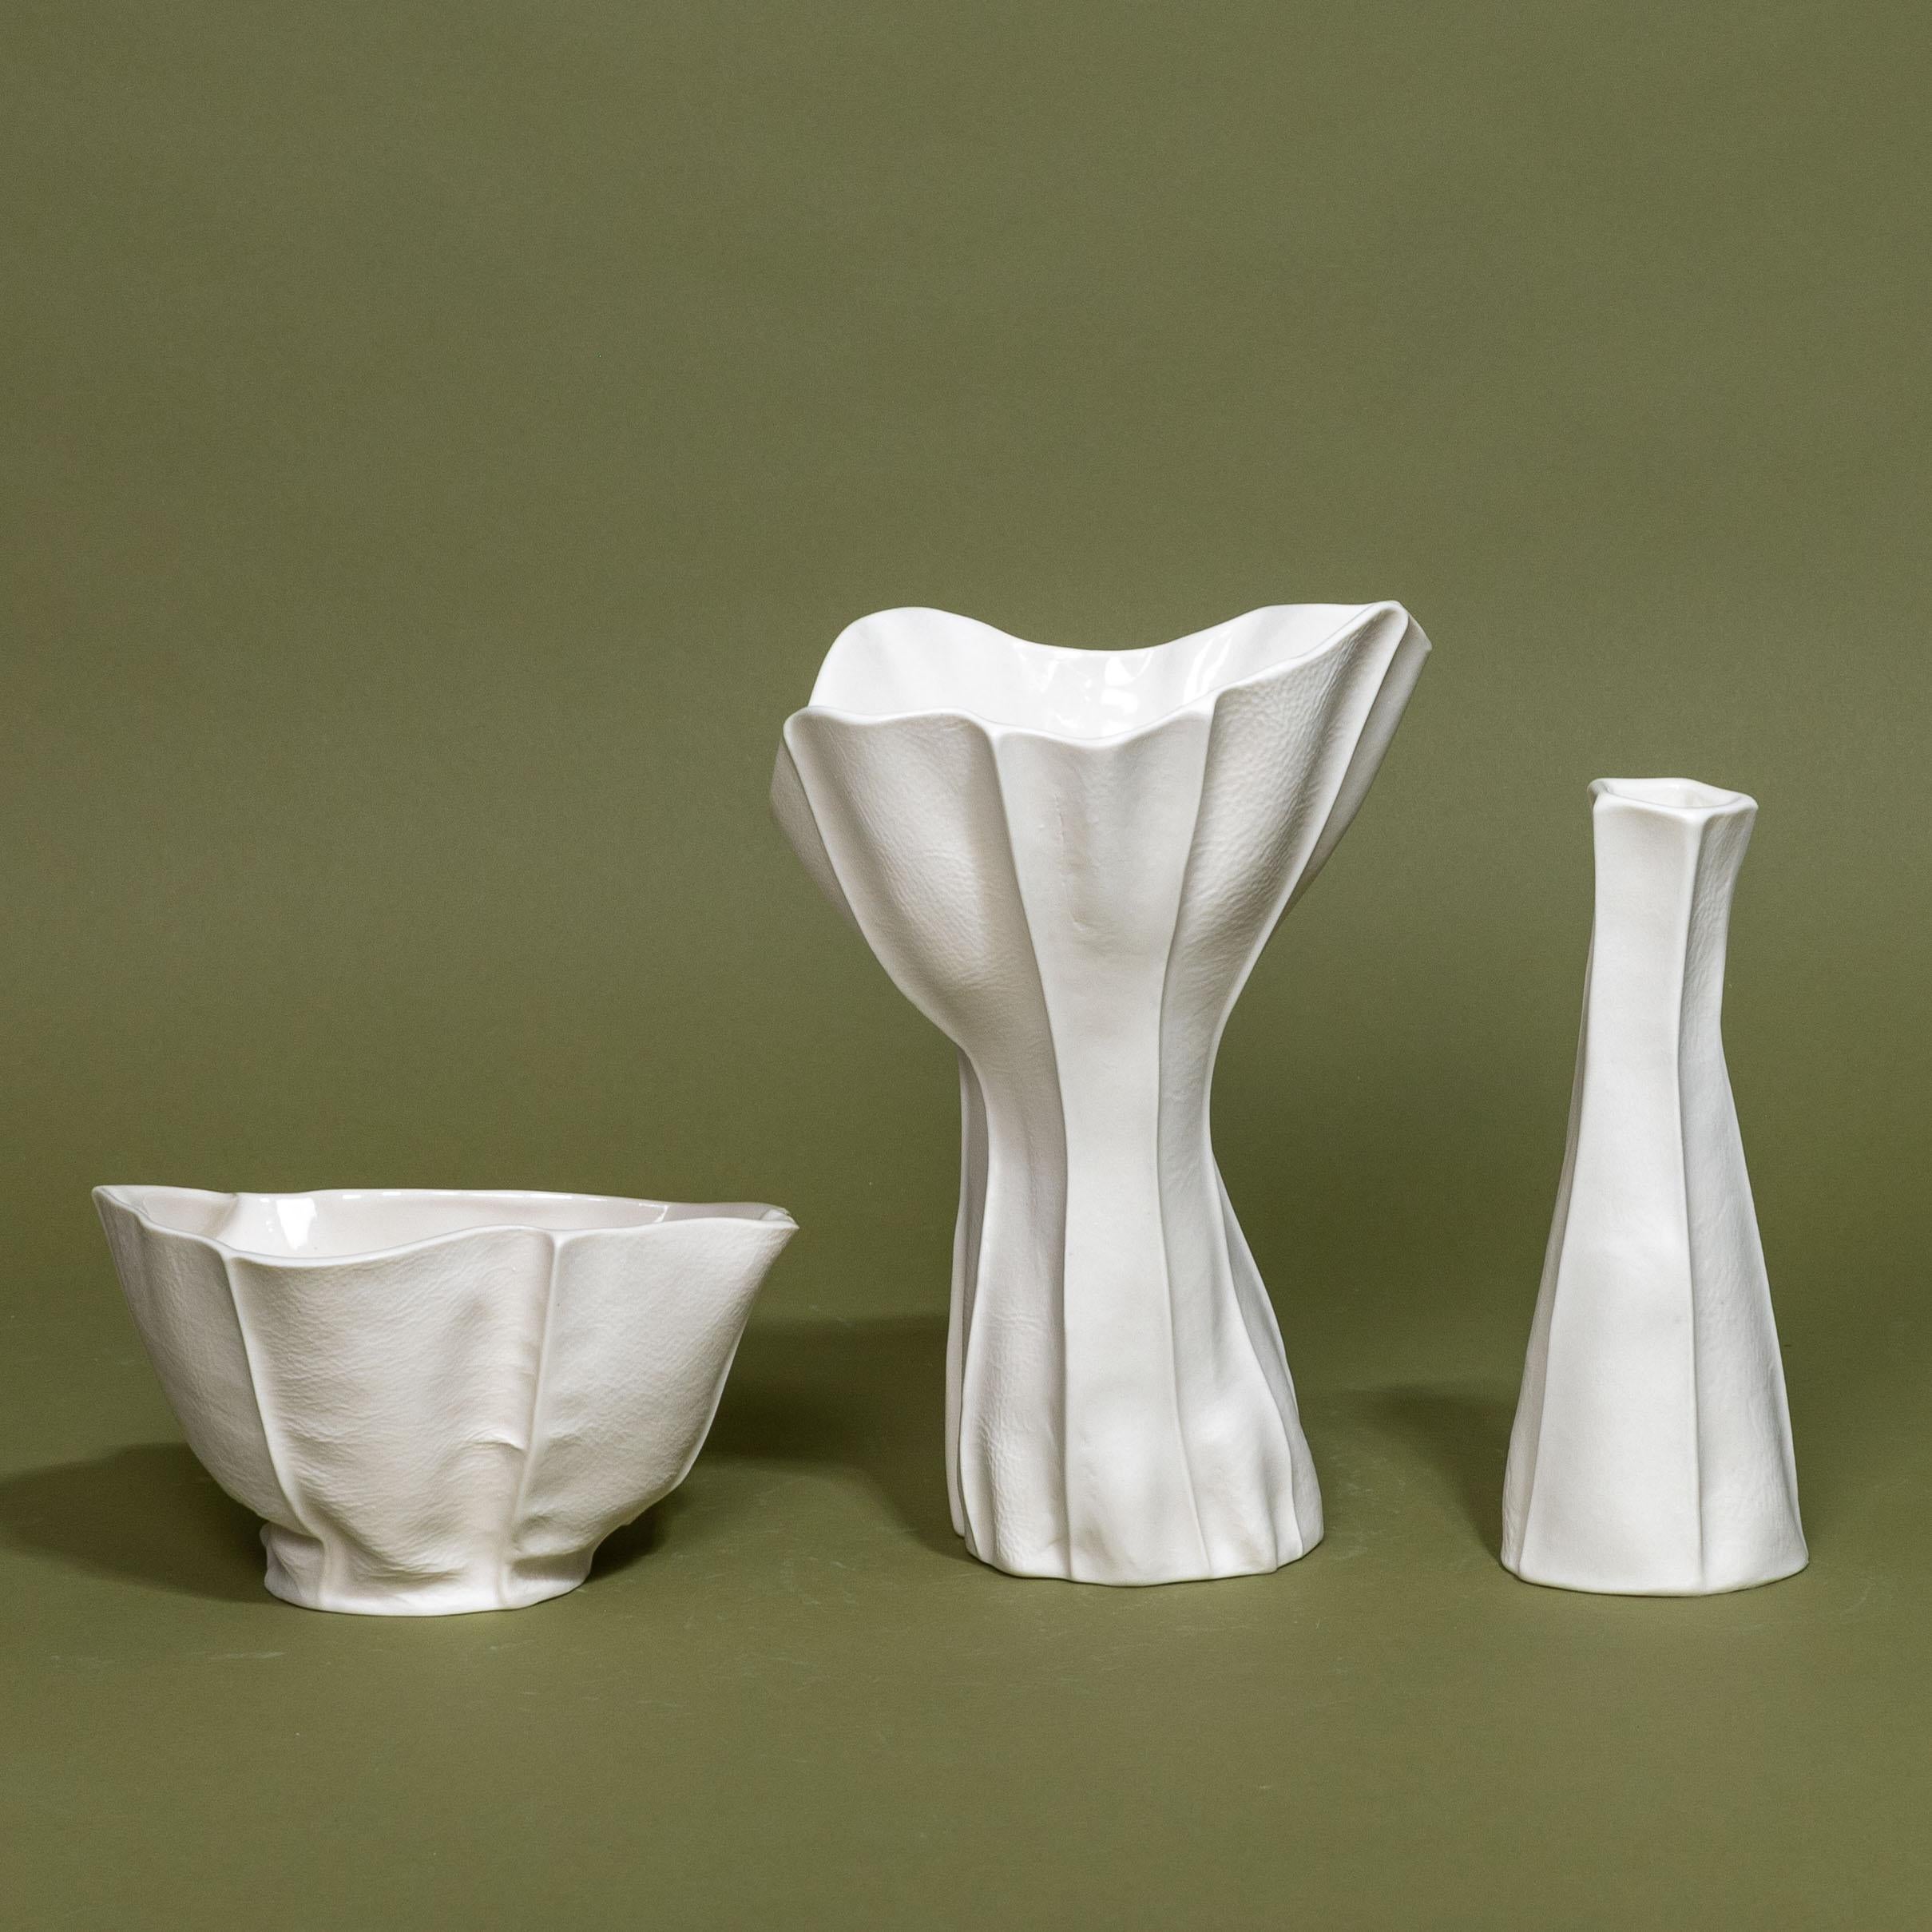 A grouping of one-of-a-kind Kawa Series items handcrafted by Luft Tanaka Studio by casting porcelain into sewn leather molds. 

Sold as a set of 3 items: 2 vases and a bowl. 

As a result of the production process, each item is one-of-a-kind. 

Tall